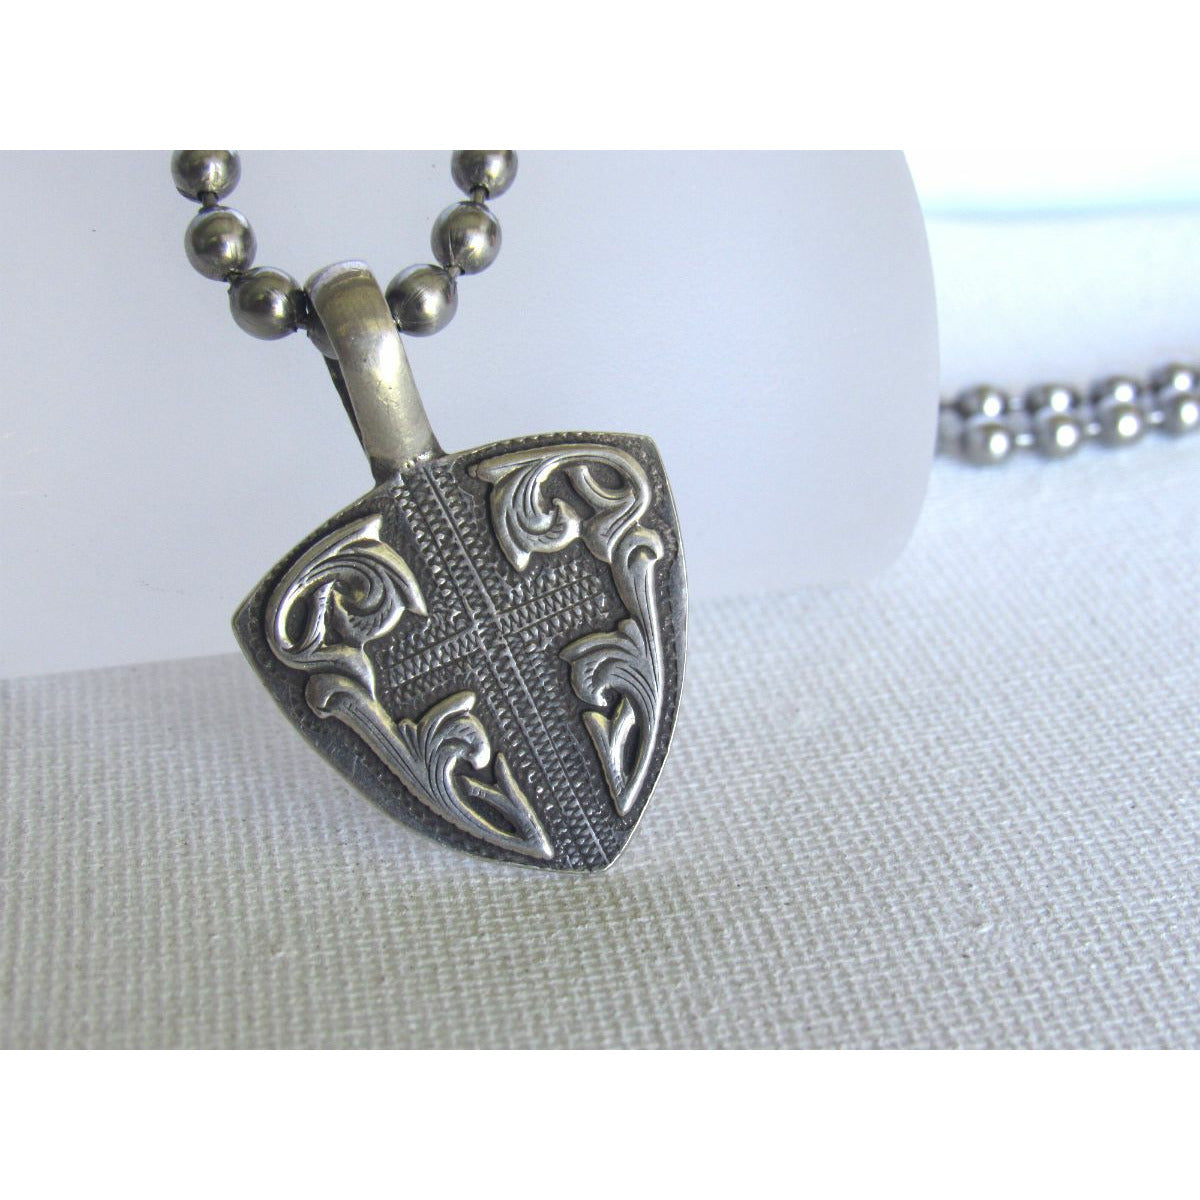 The "Hidden Cross Guitar Pick" is a handmade solid sterling silver guitar shaped pendant with a smooth raised border with an edgy western style hand engraved background which features a smooth recessed cross. The pendant measures at 1" X 1 3/8".